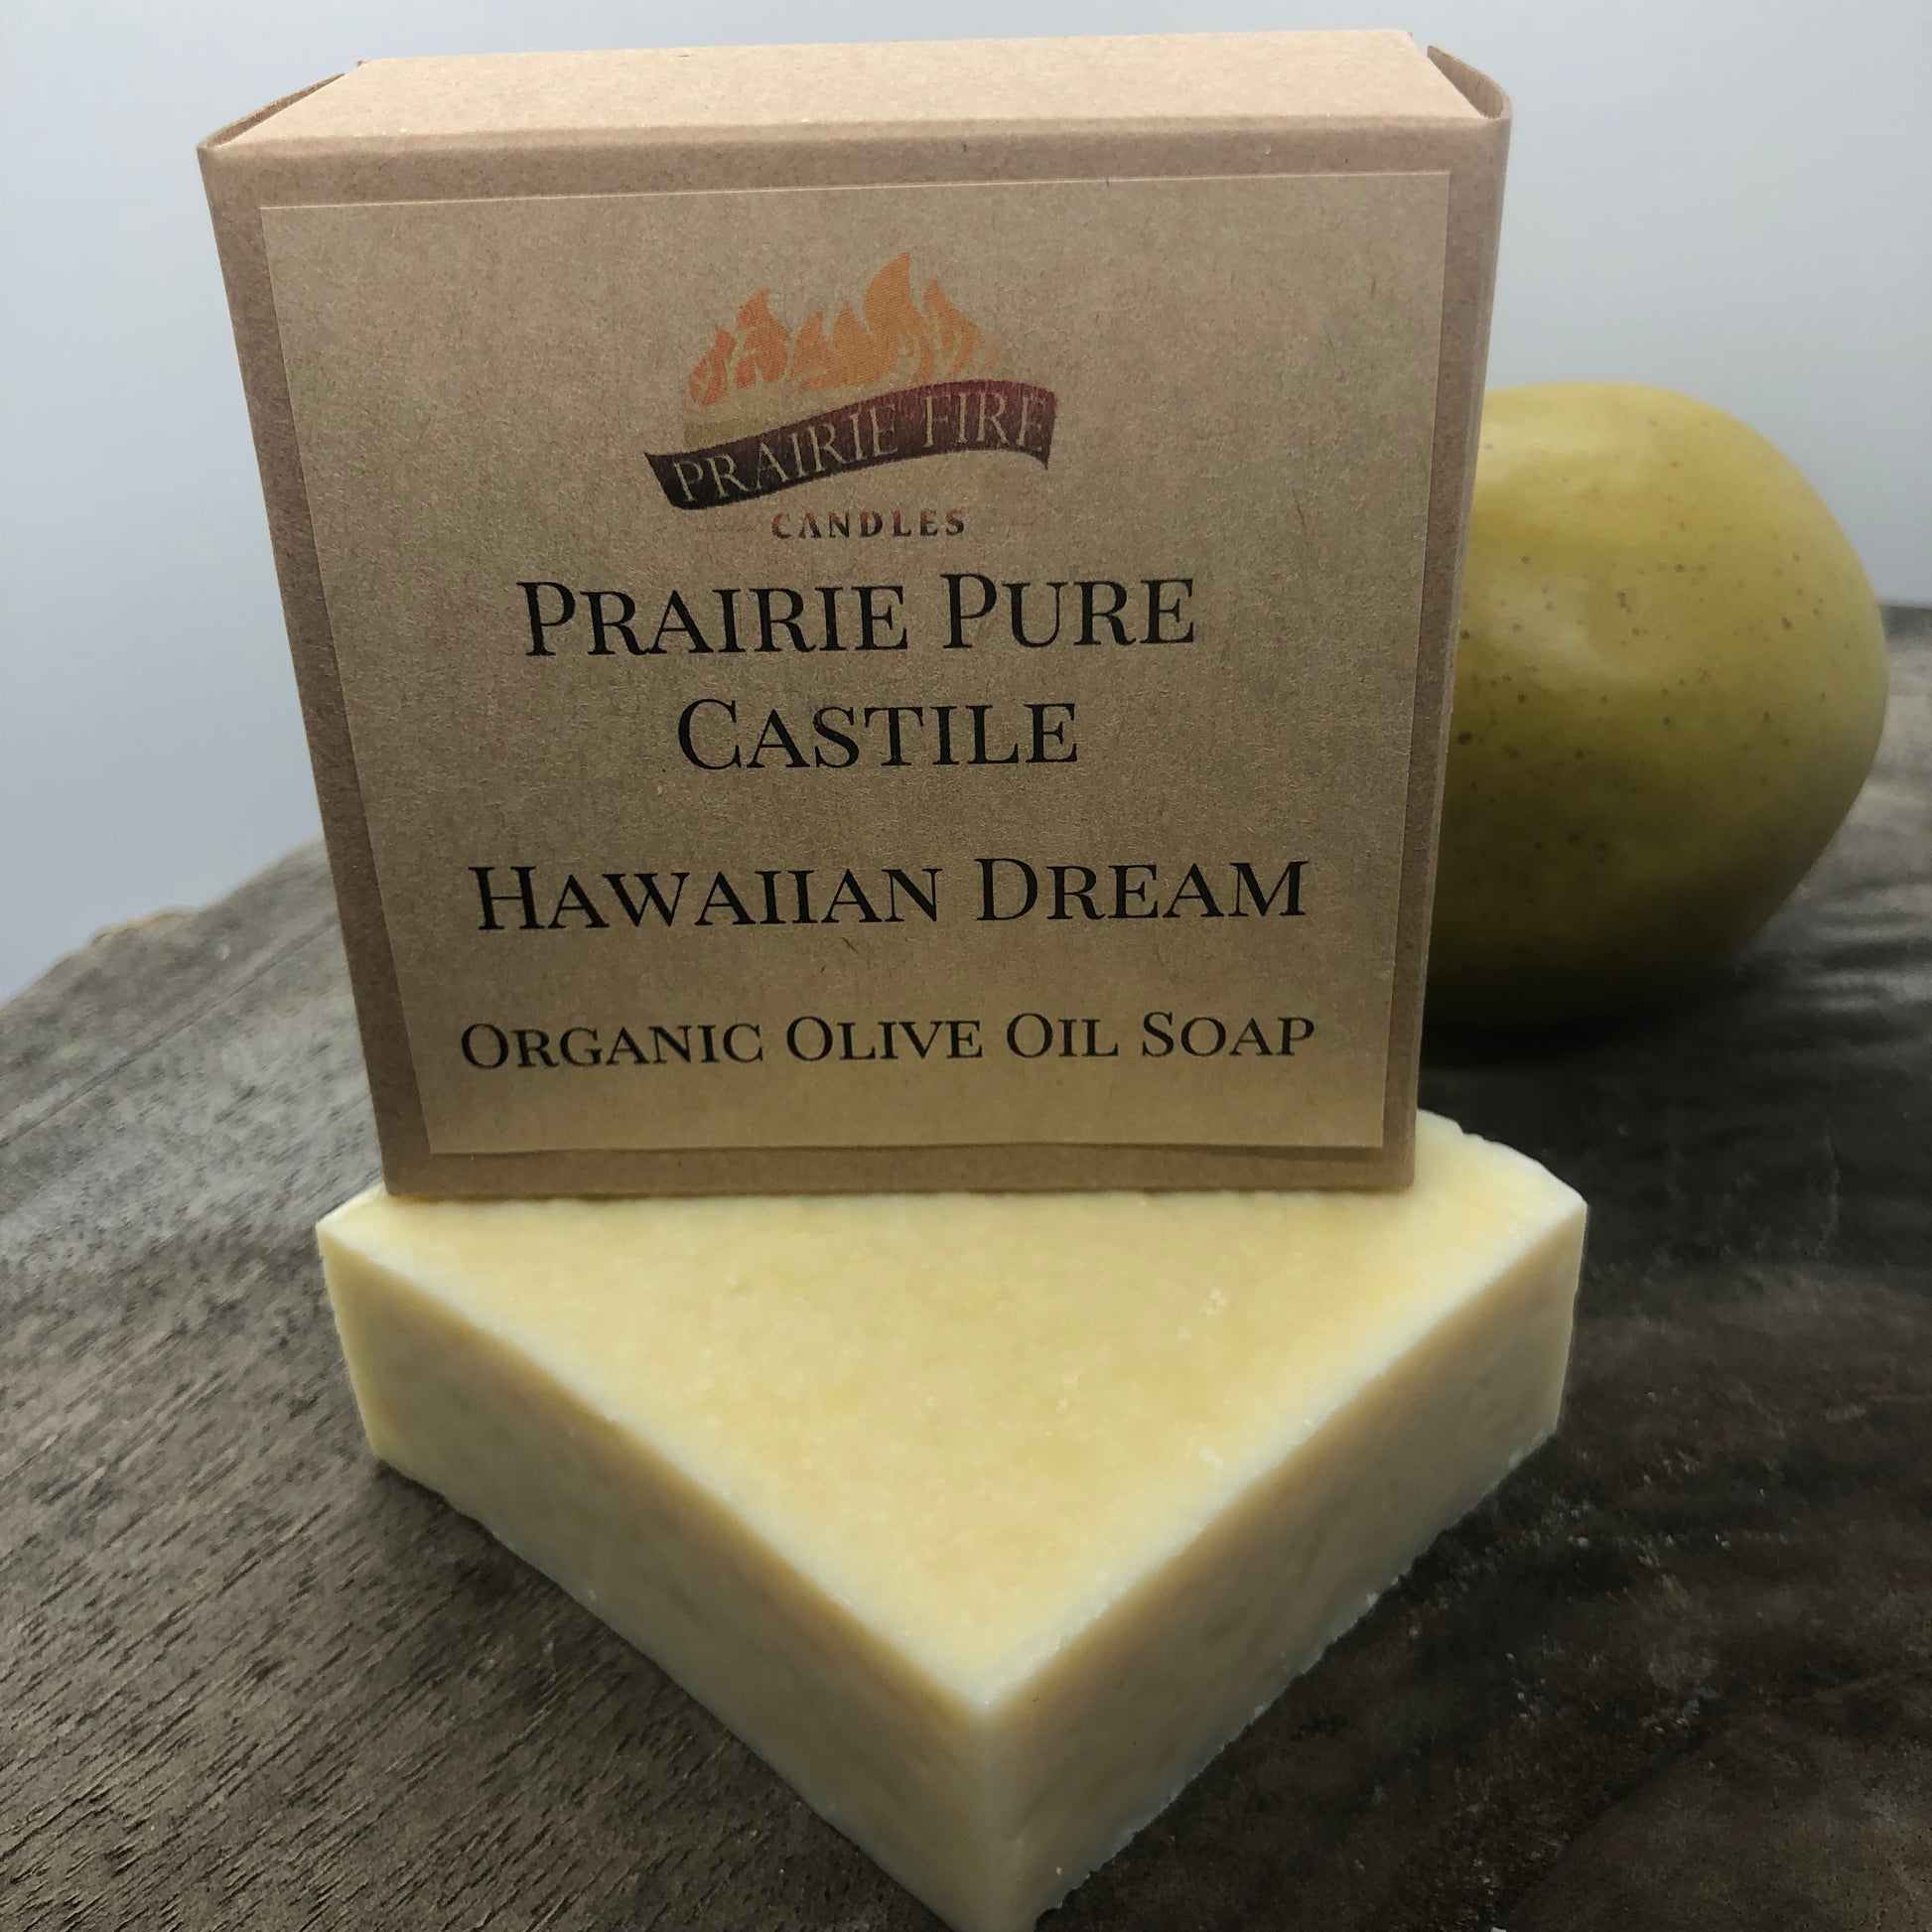 Hawaiian Dream Real Castile Organic Olive Oil Soap for Sensitive Skin - Dye Free - 100% Certified Organic Extra Virgin Olive Oil - Prairie Fire Candles